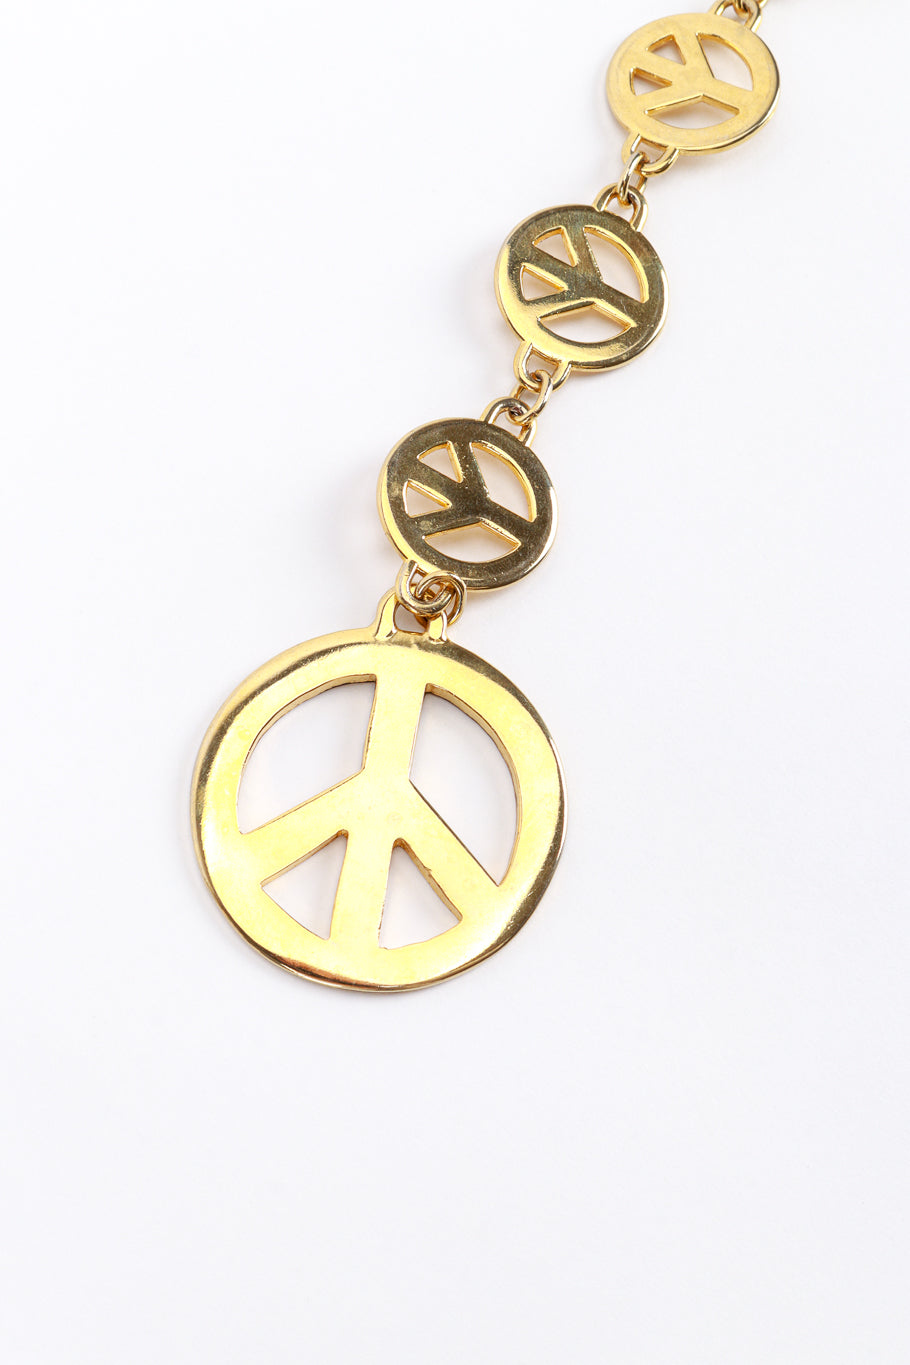 Vintage Moschino Jeans Peace Sign Draped Chain Belt II back on end charm @recess la